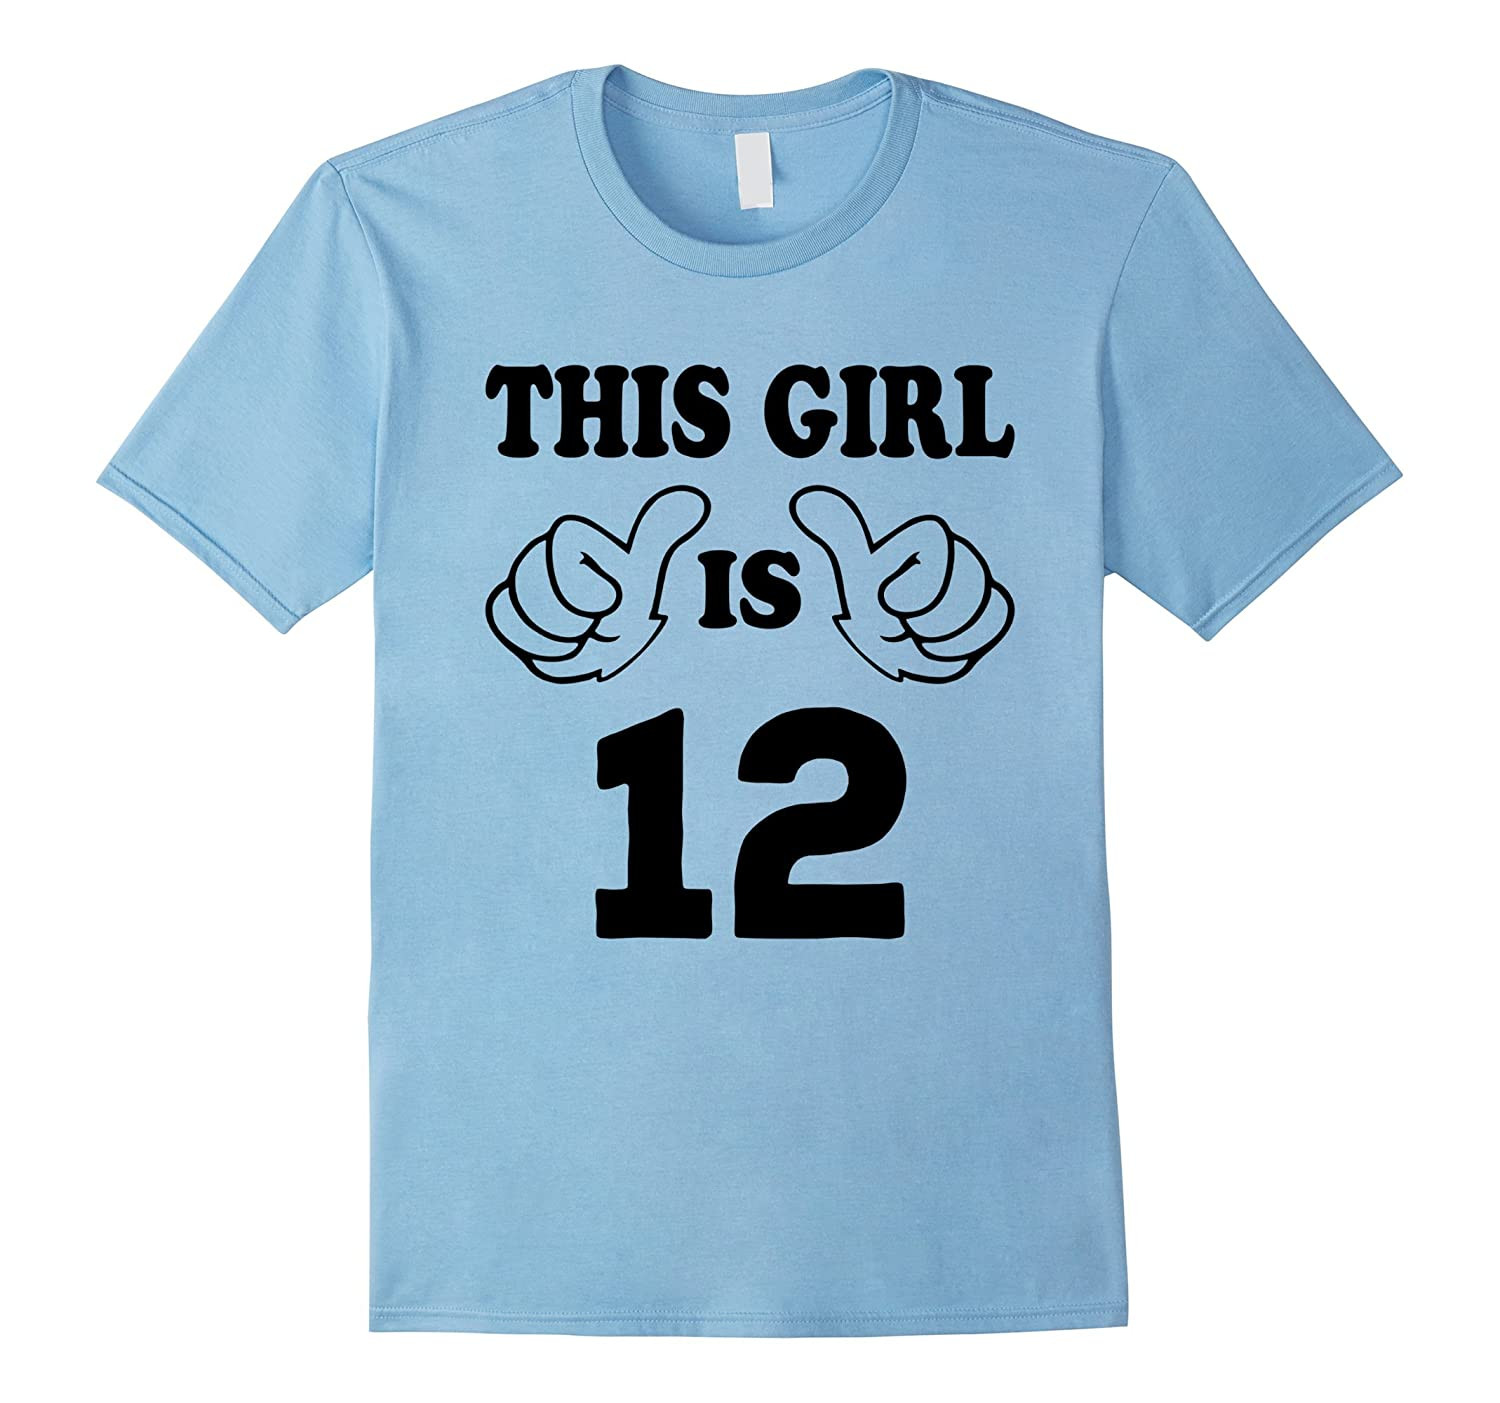 12 Year Girl Birthday Gift Ideas
 This Girl is twelve 12 Years Old 12th Birthday Gift Ideas